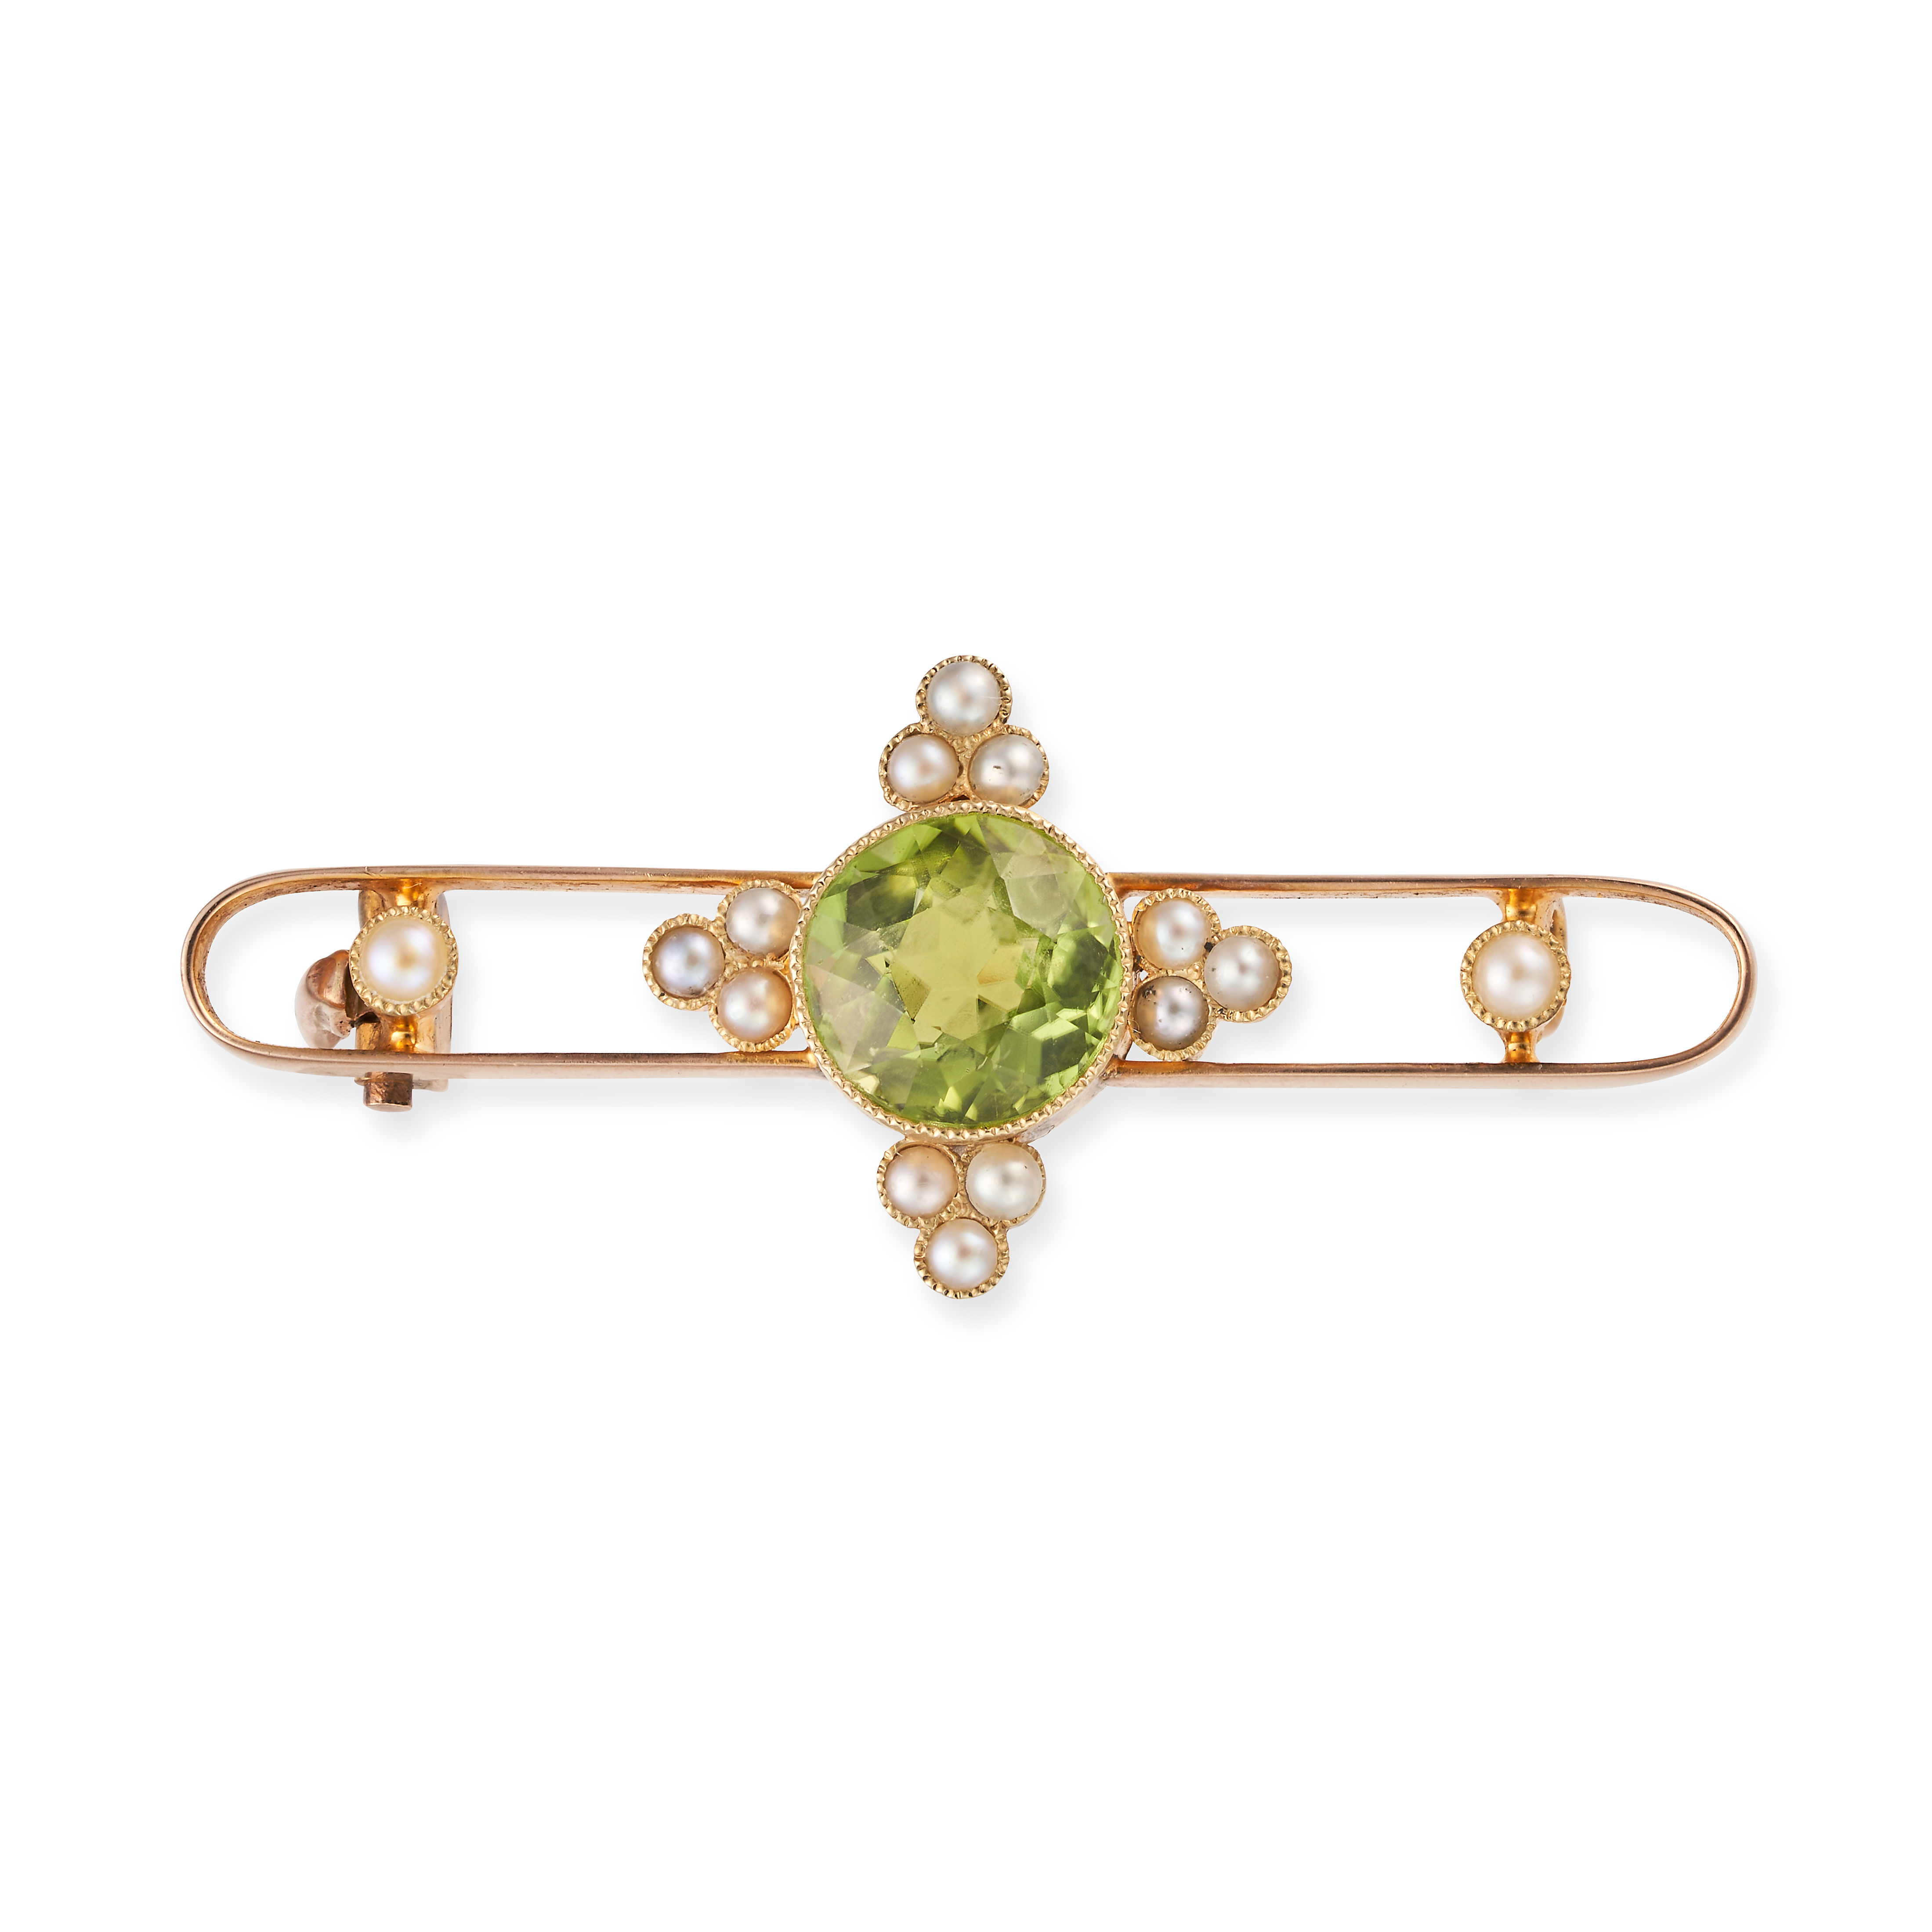 AN ANTIQUE PERIDOT AND DIAMOND BROOCH in 15ct yellow gold, set with a round cut peridot accented ...